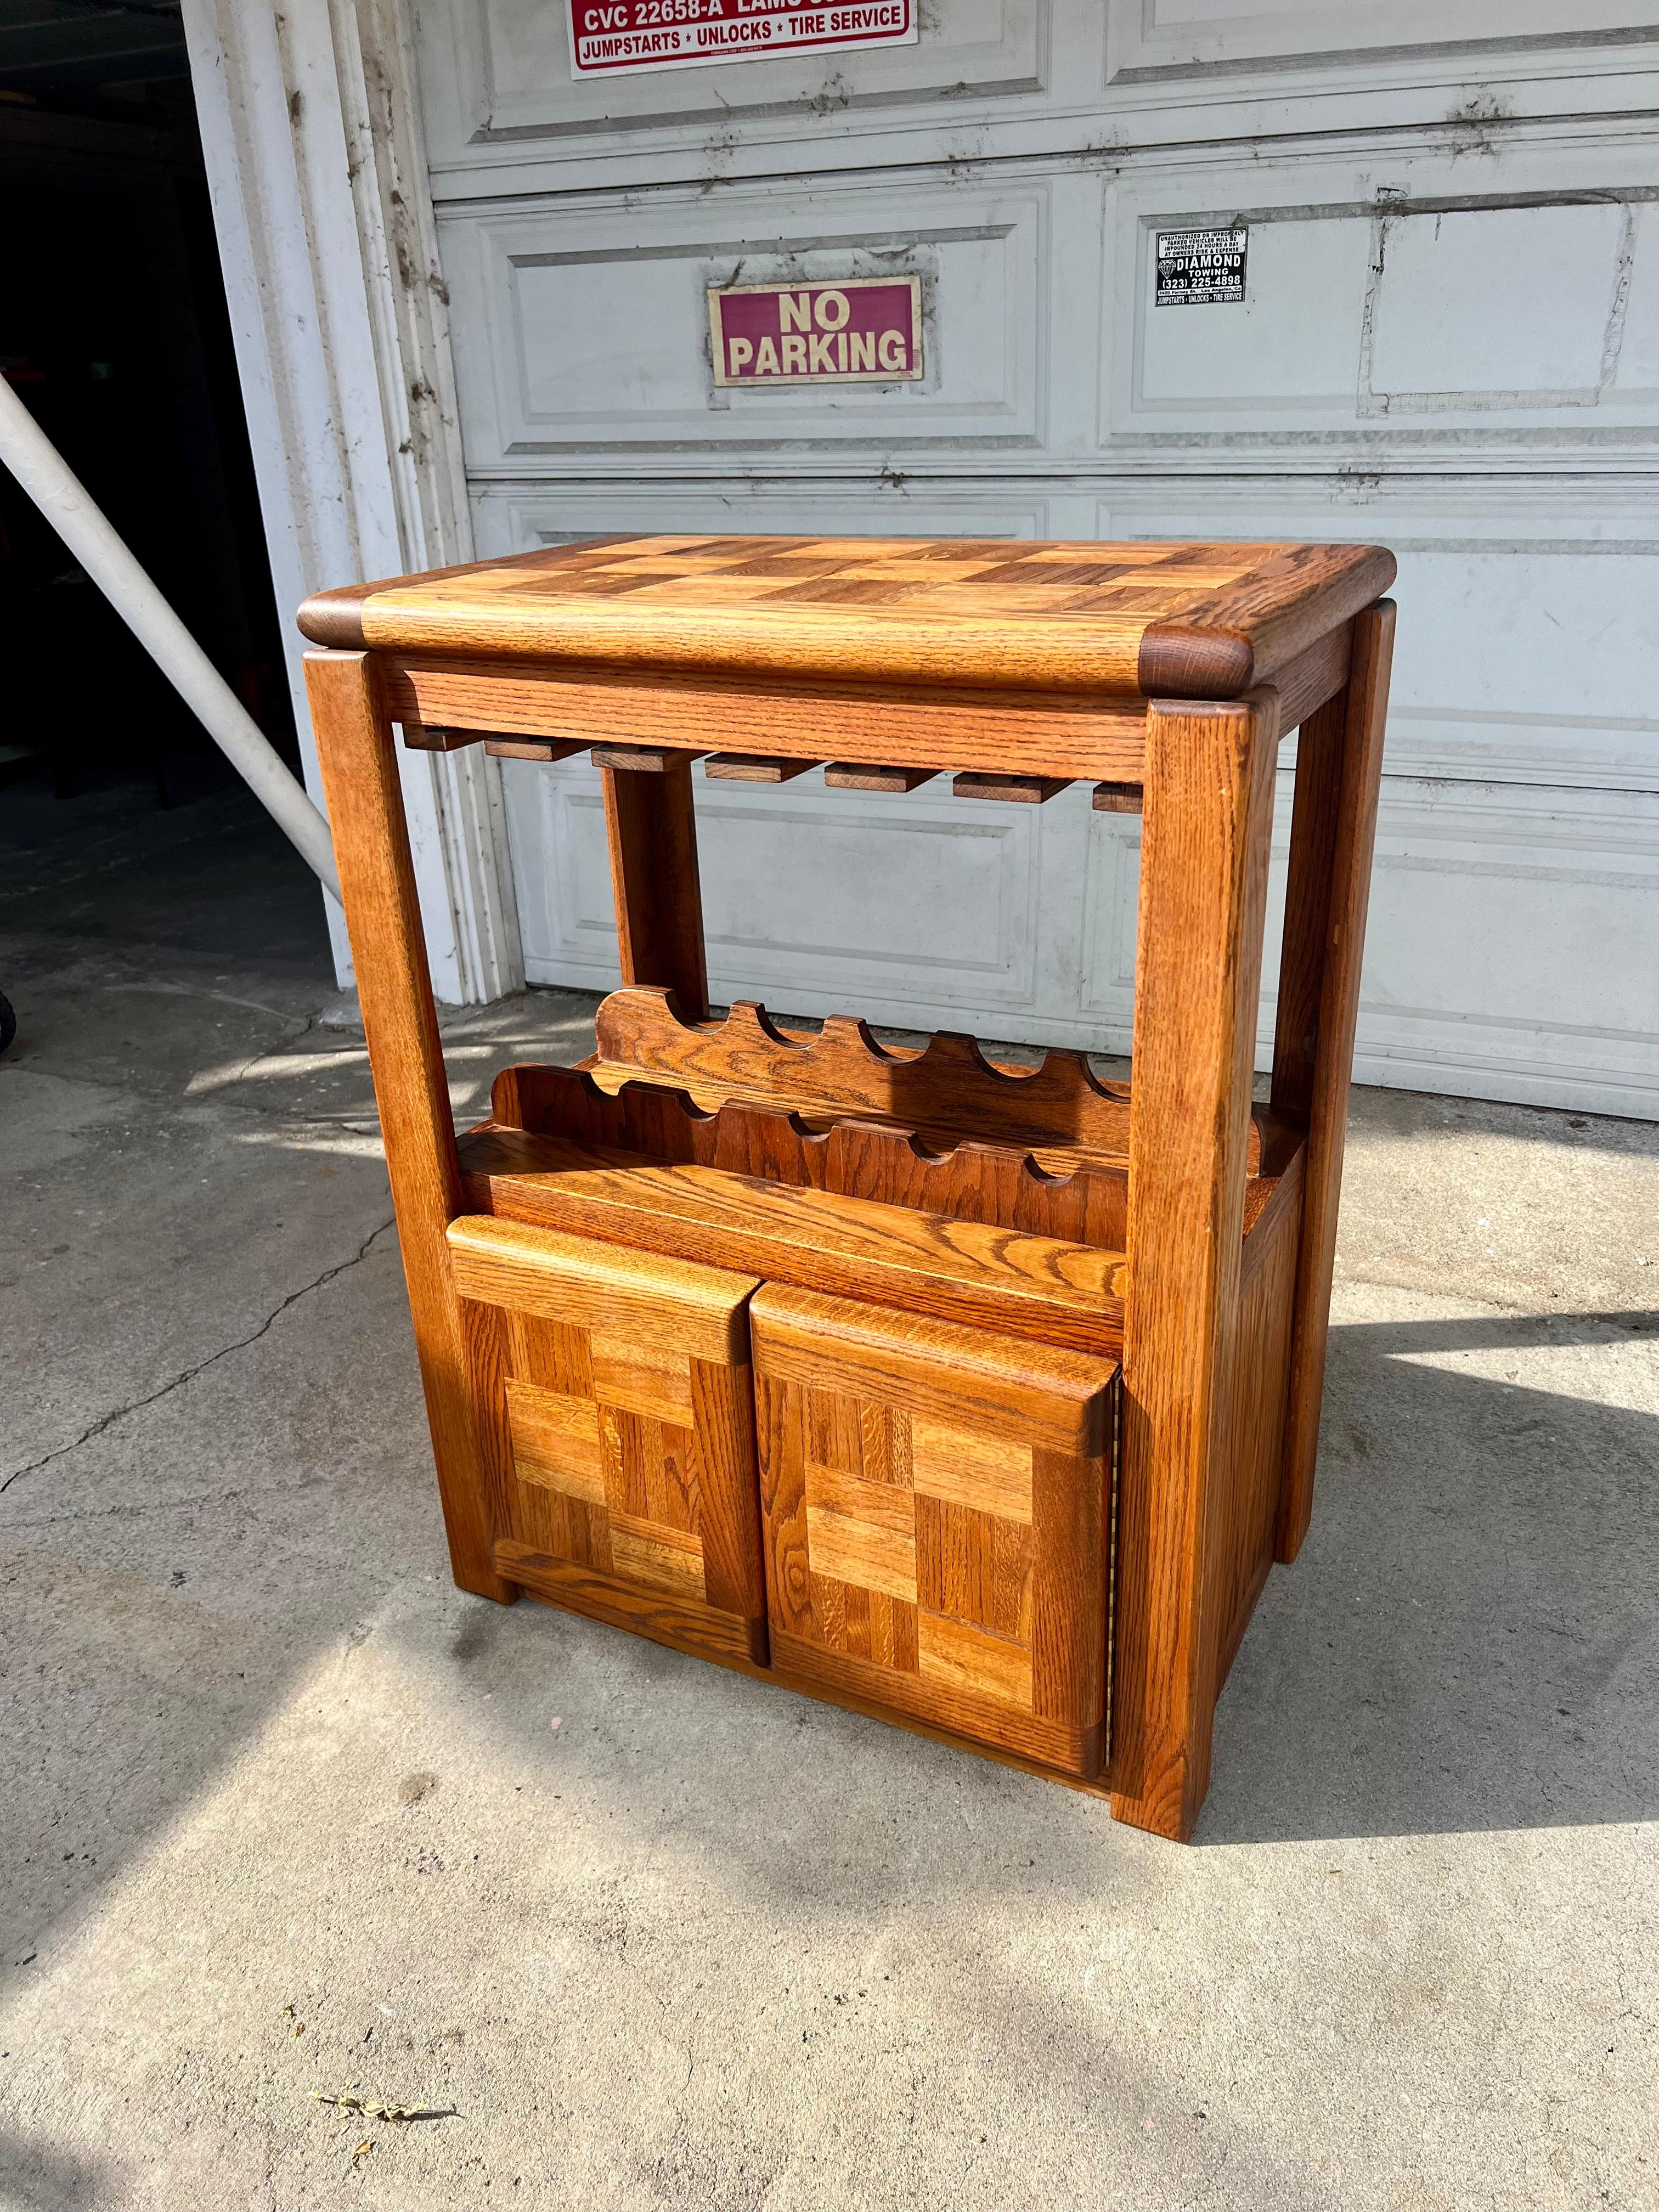 This vintage oak dry bar cabinet features exquisite parquet detailing on it’s top and doors. Superb craftmanship adds a wine rack with space for 5 bottles and multiple stemmed glassware. This chunky gem has both style and function and is the perfect